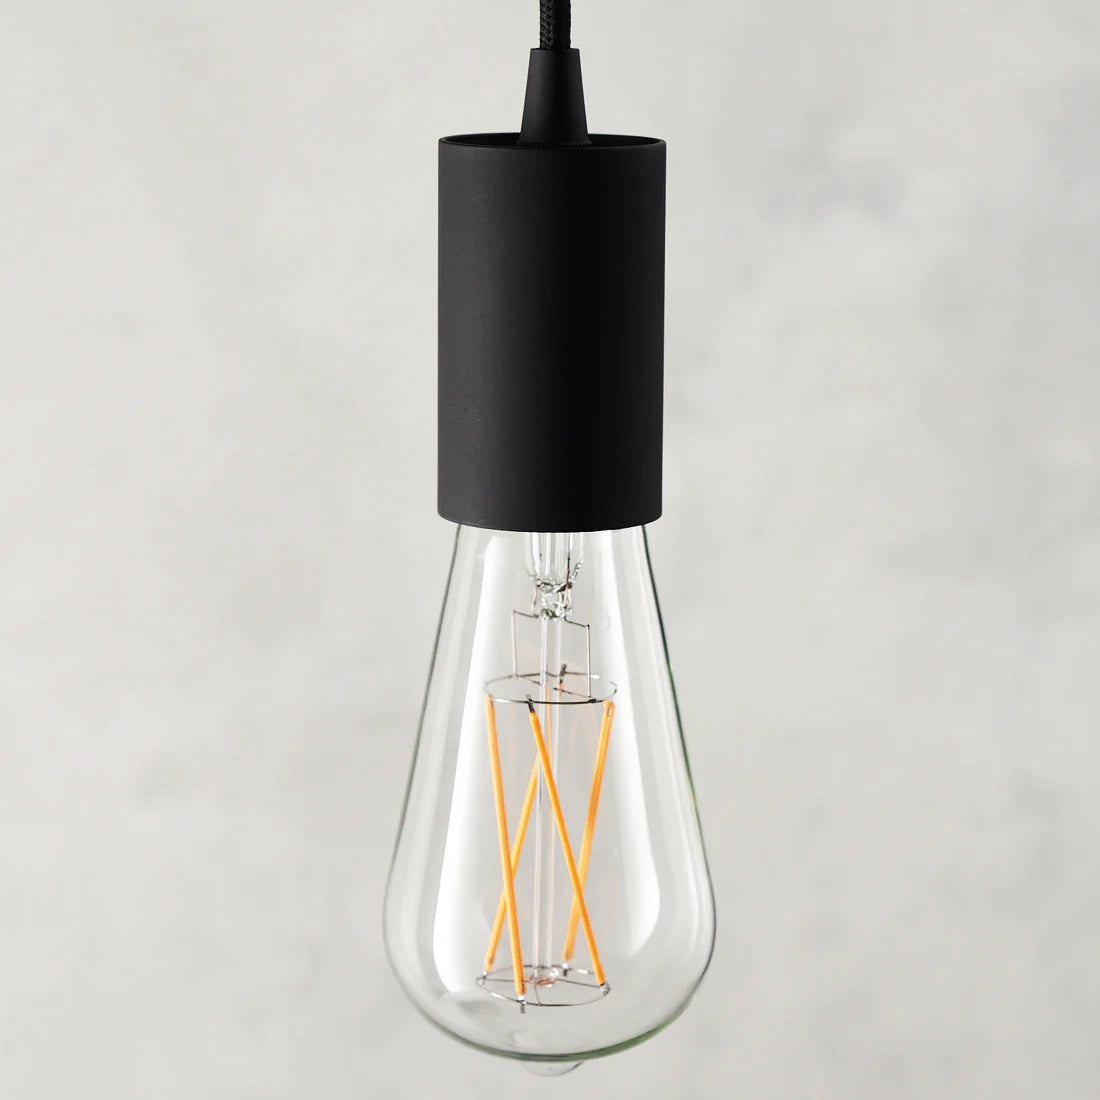 The Well Lit Leo LED light bulb is pictured with a Well Lit Spin Pendant Light in Black and sold by South Charlotte Fine Lighting